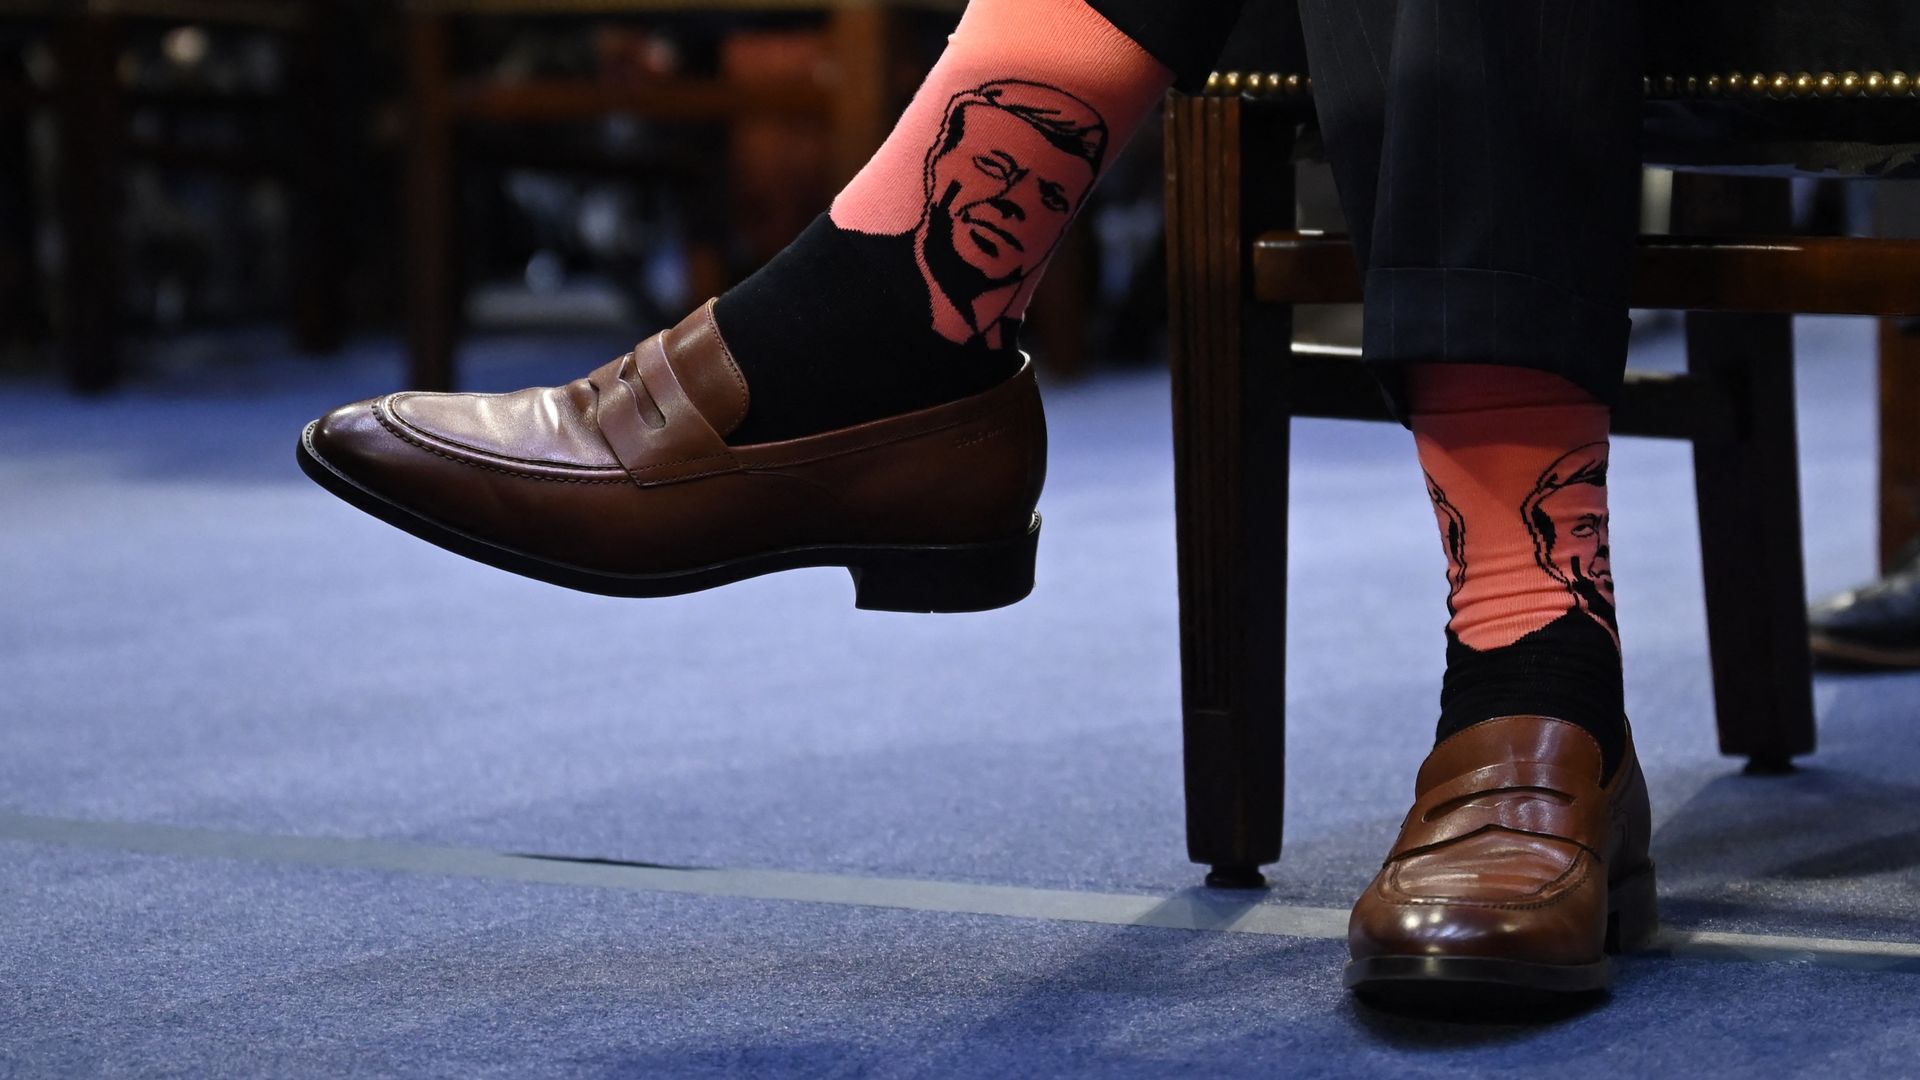 The husband of Judge Ketanji Brown Jackson is seen wearing socks embroidered with portraits of John F. Kennedy.